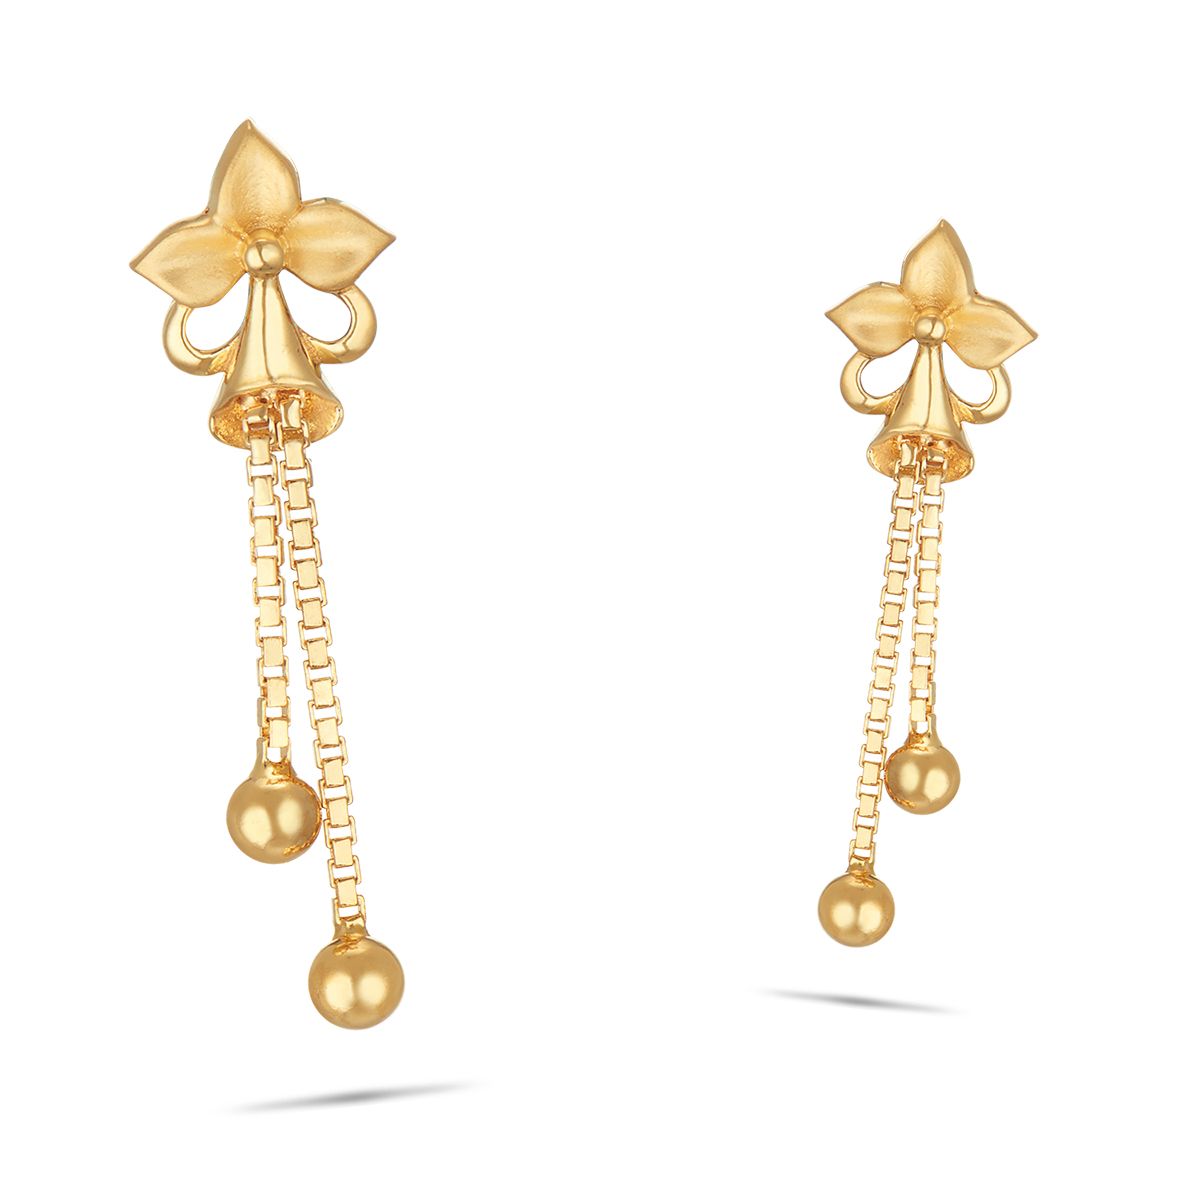 Check out these latest designs of gold earrings to suit every occasion